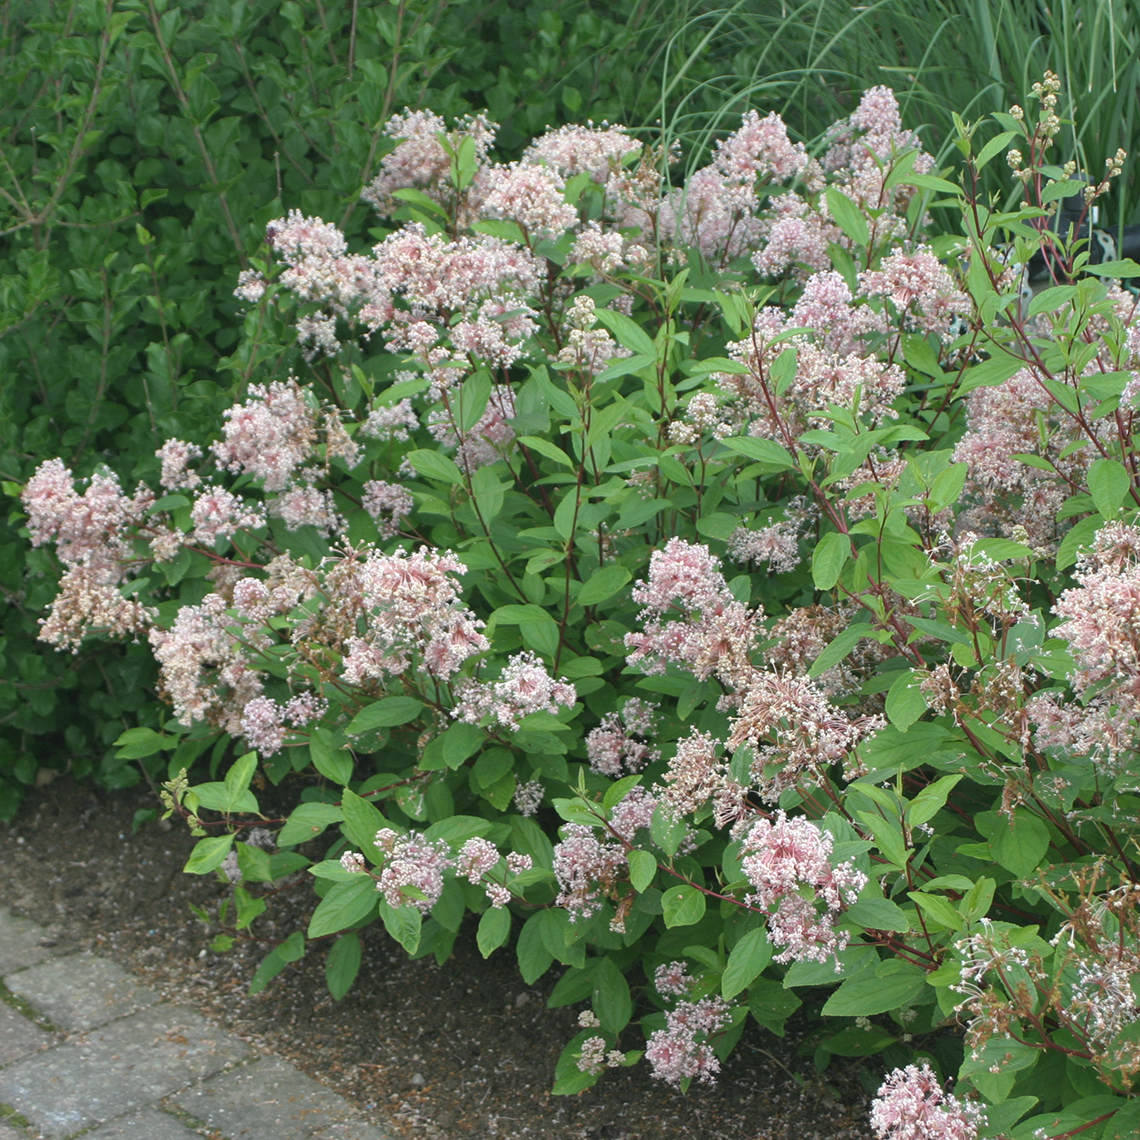 Ceanothus Marie Simon with fluffy pink blooms in landscape